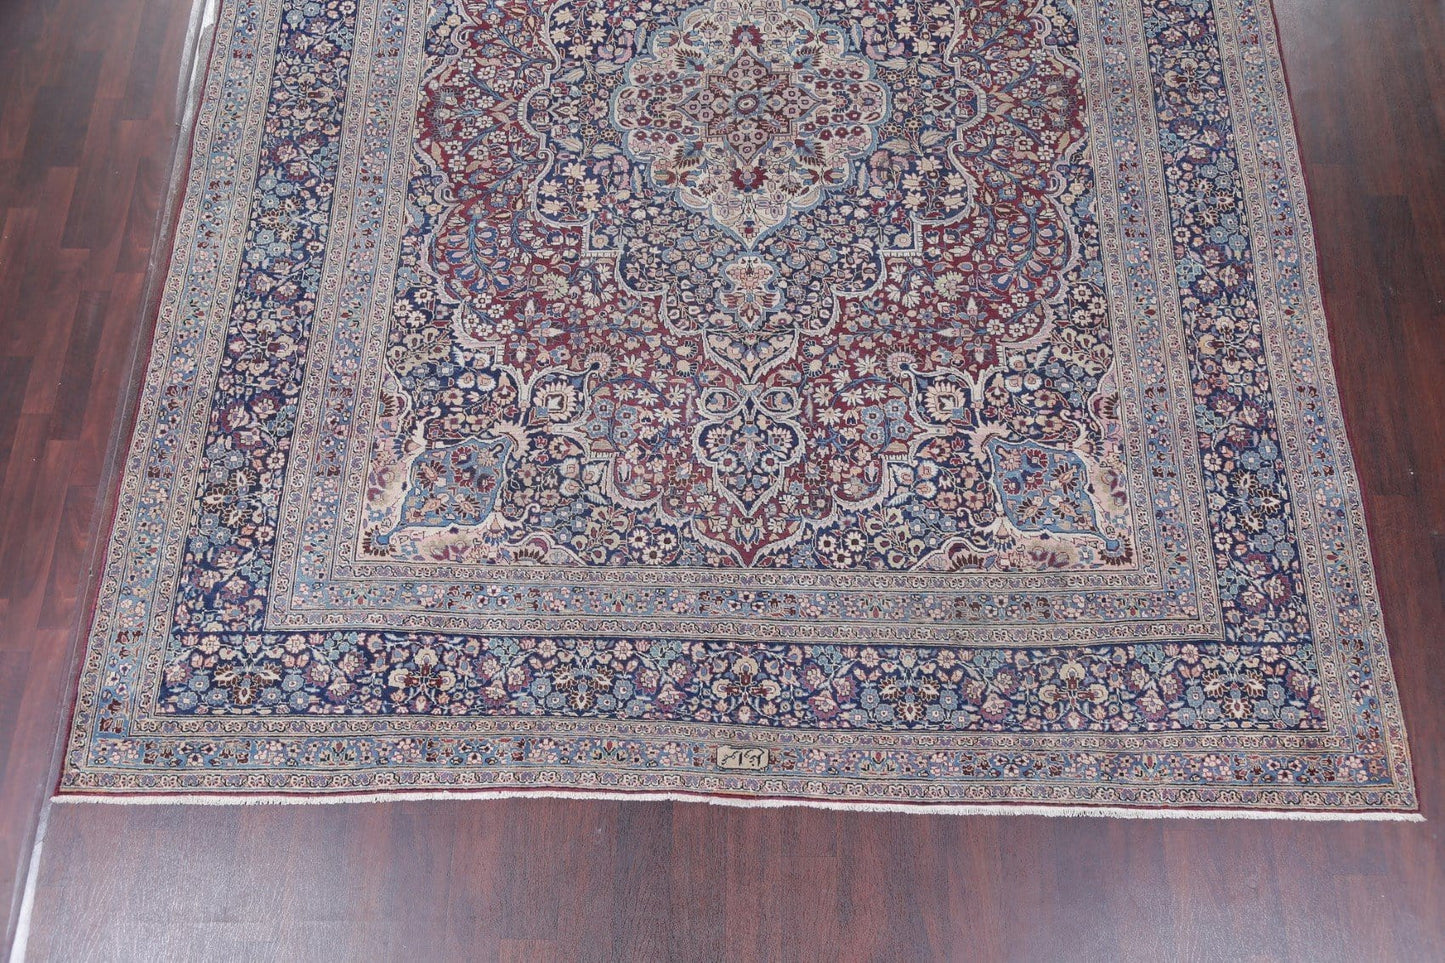 Pre-1900 Antique Floral Mashad Persian Hand-Knotted 10x13 Burgundy Area Rug